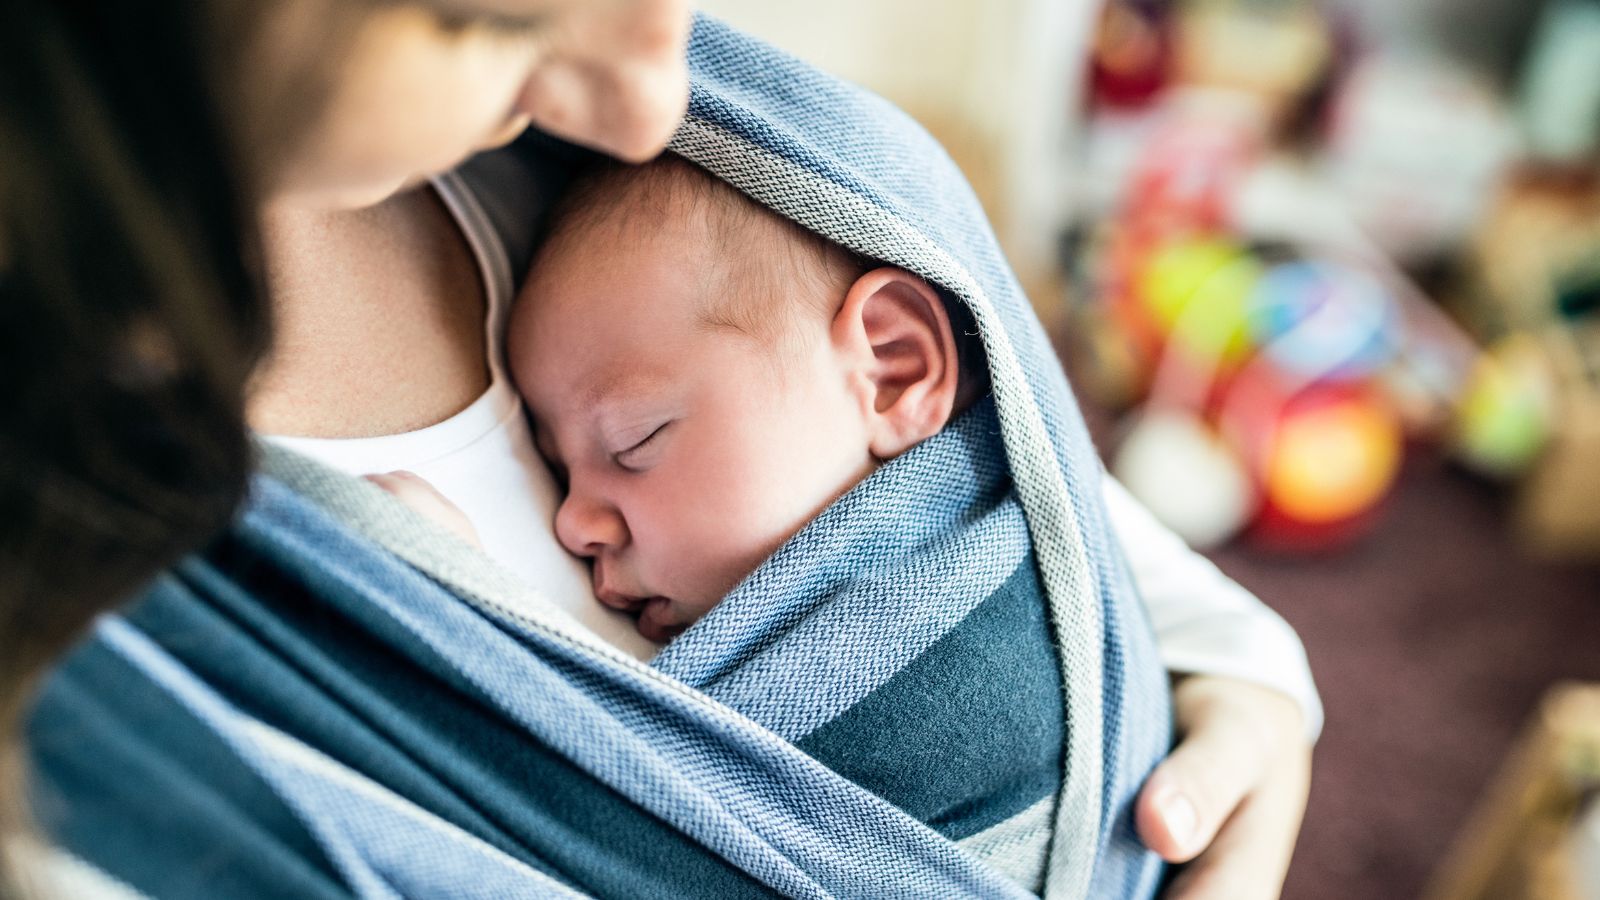 Mother carrying baby in a sling (Photo: Shutterstock)